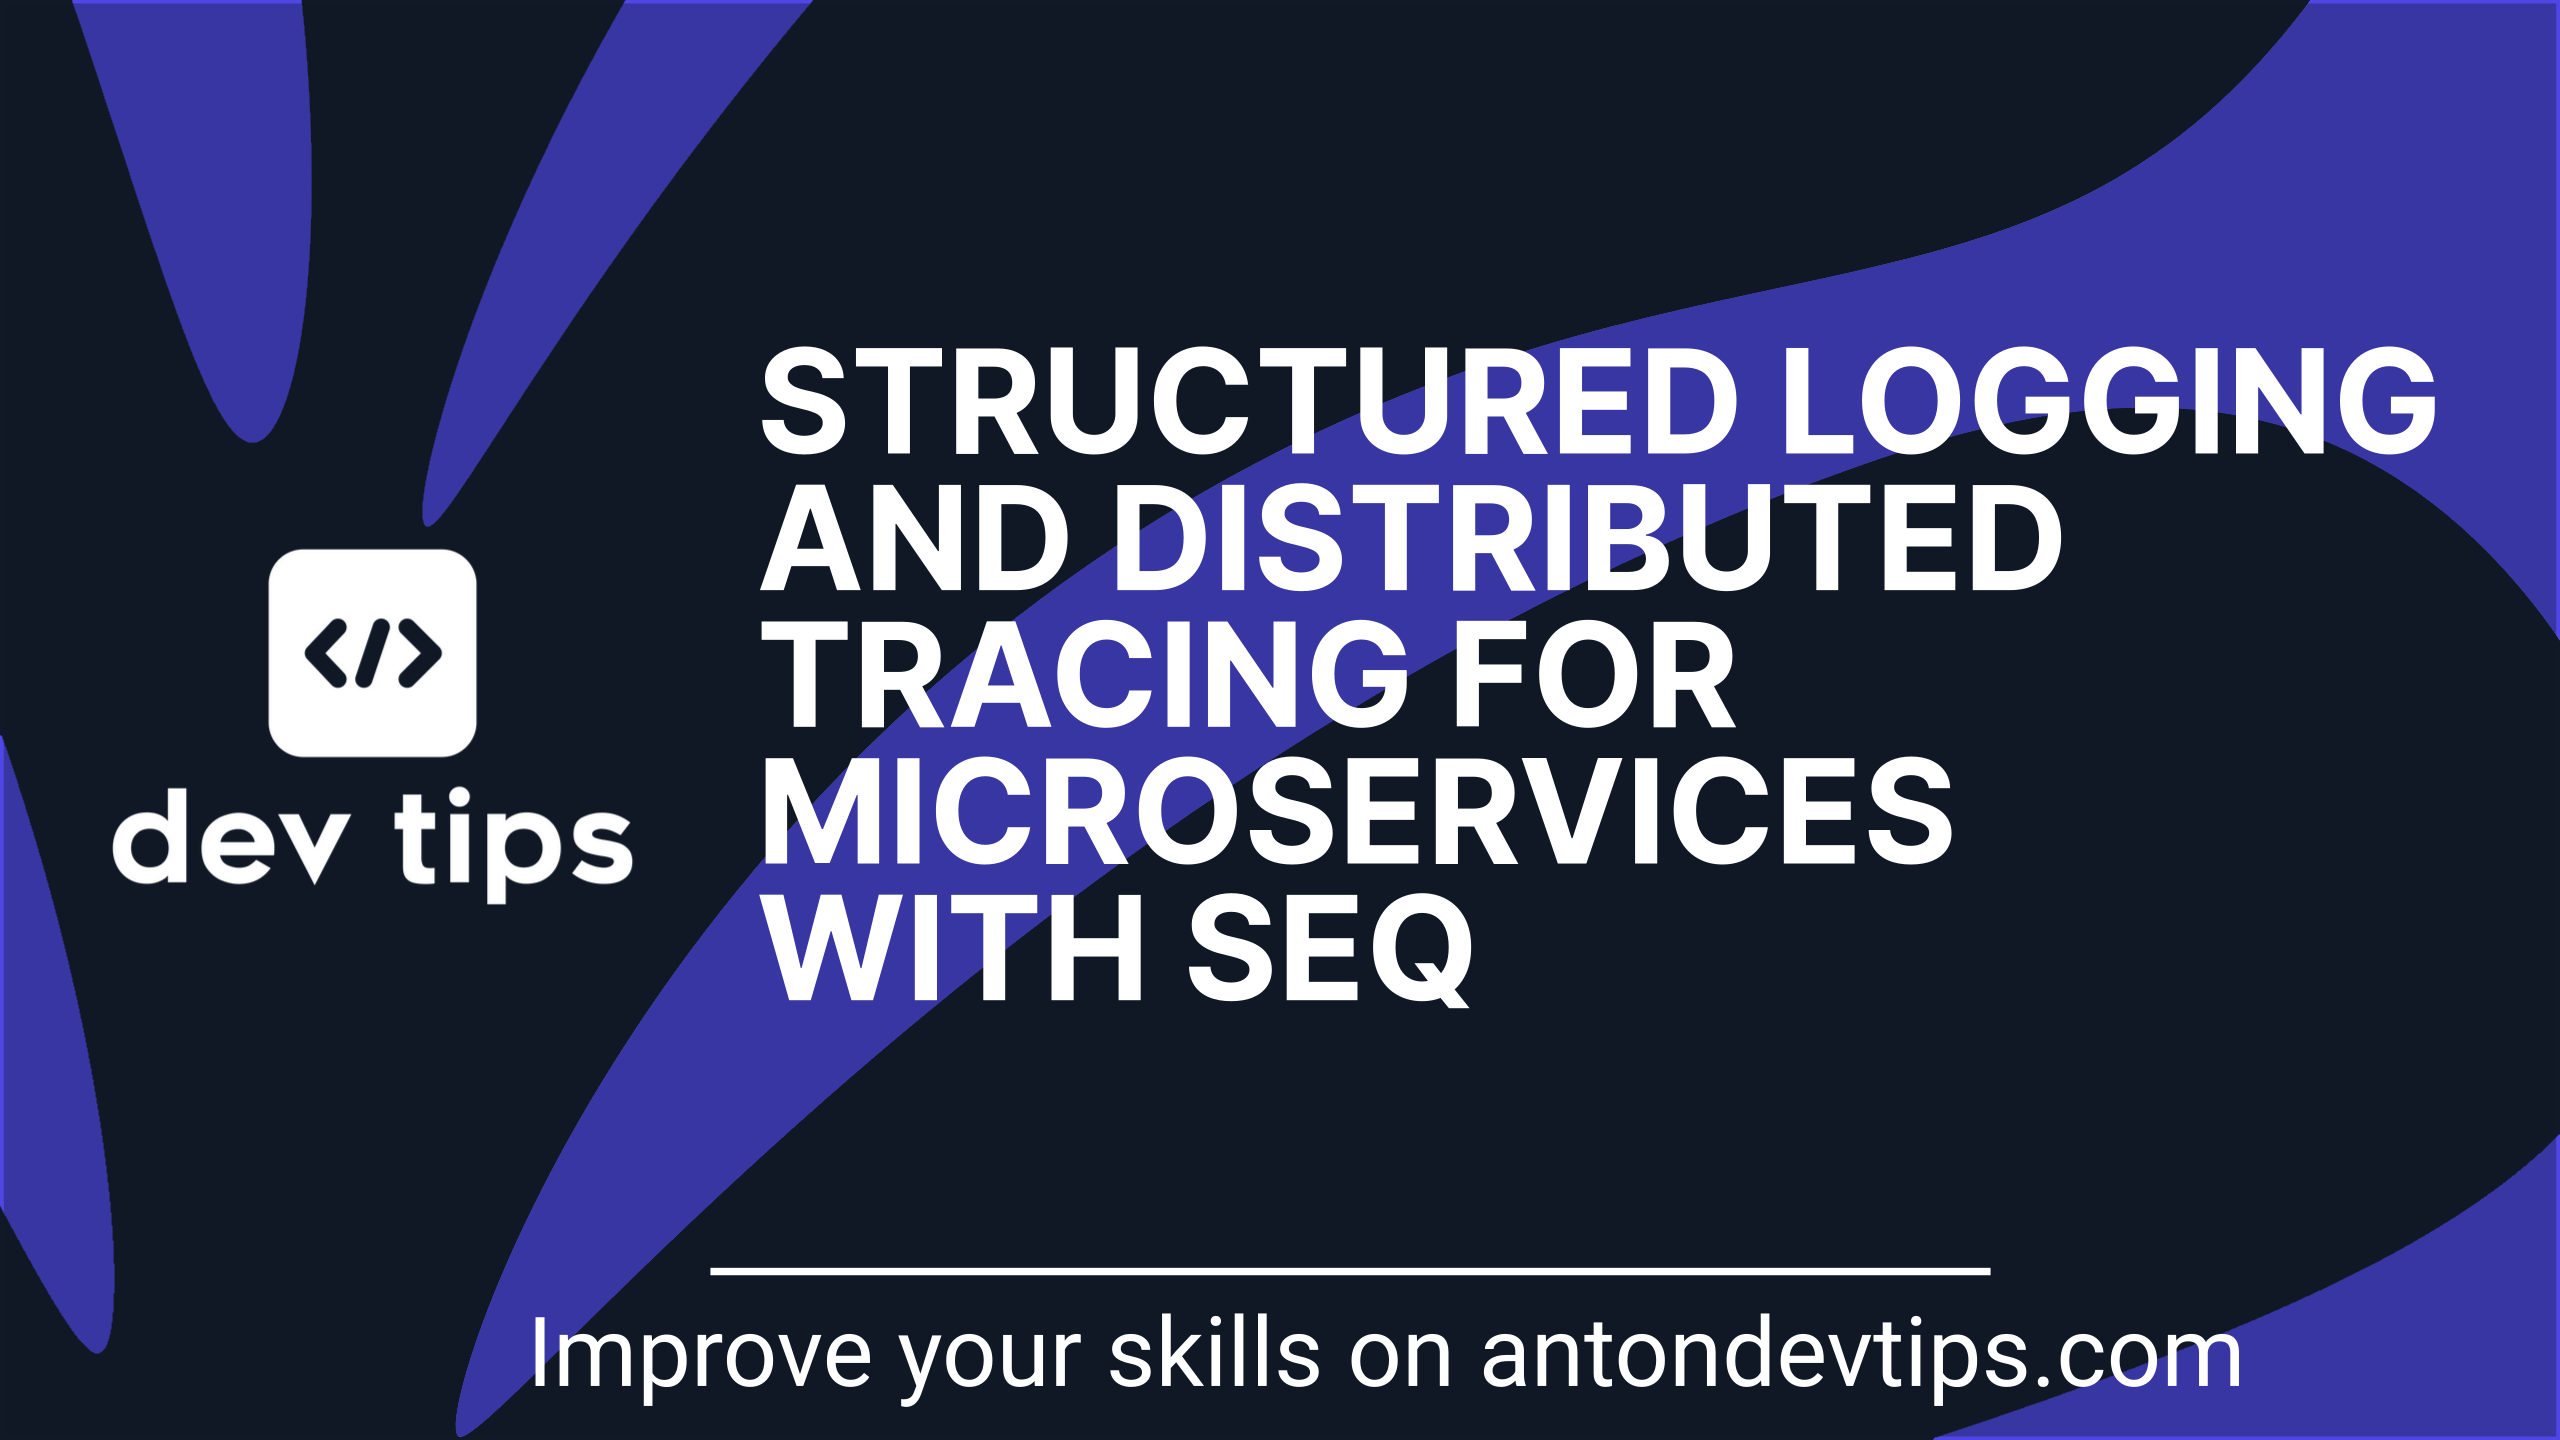 How to Implement Structured Logging and Distributed Tracing for Microservices with Seq